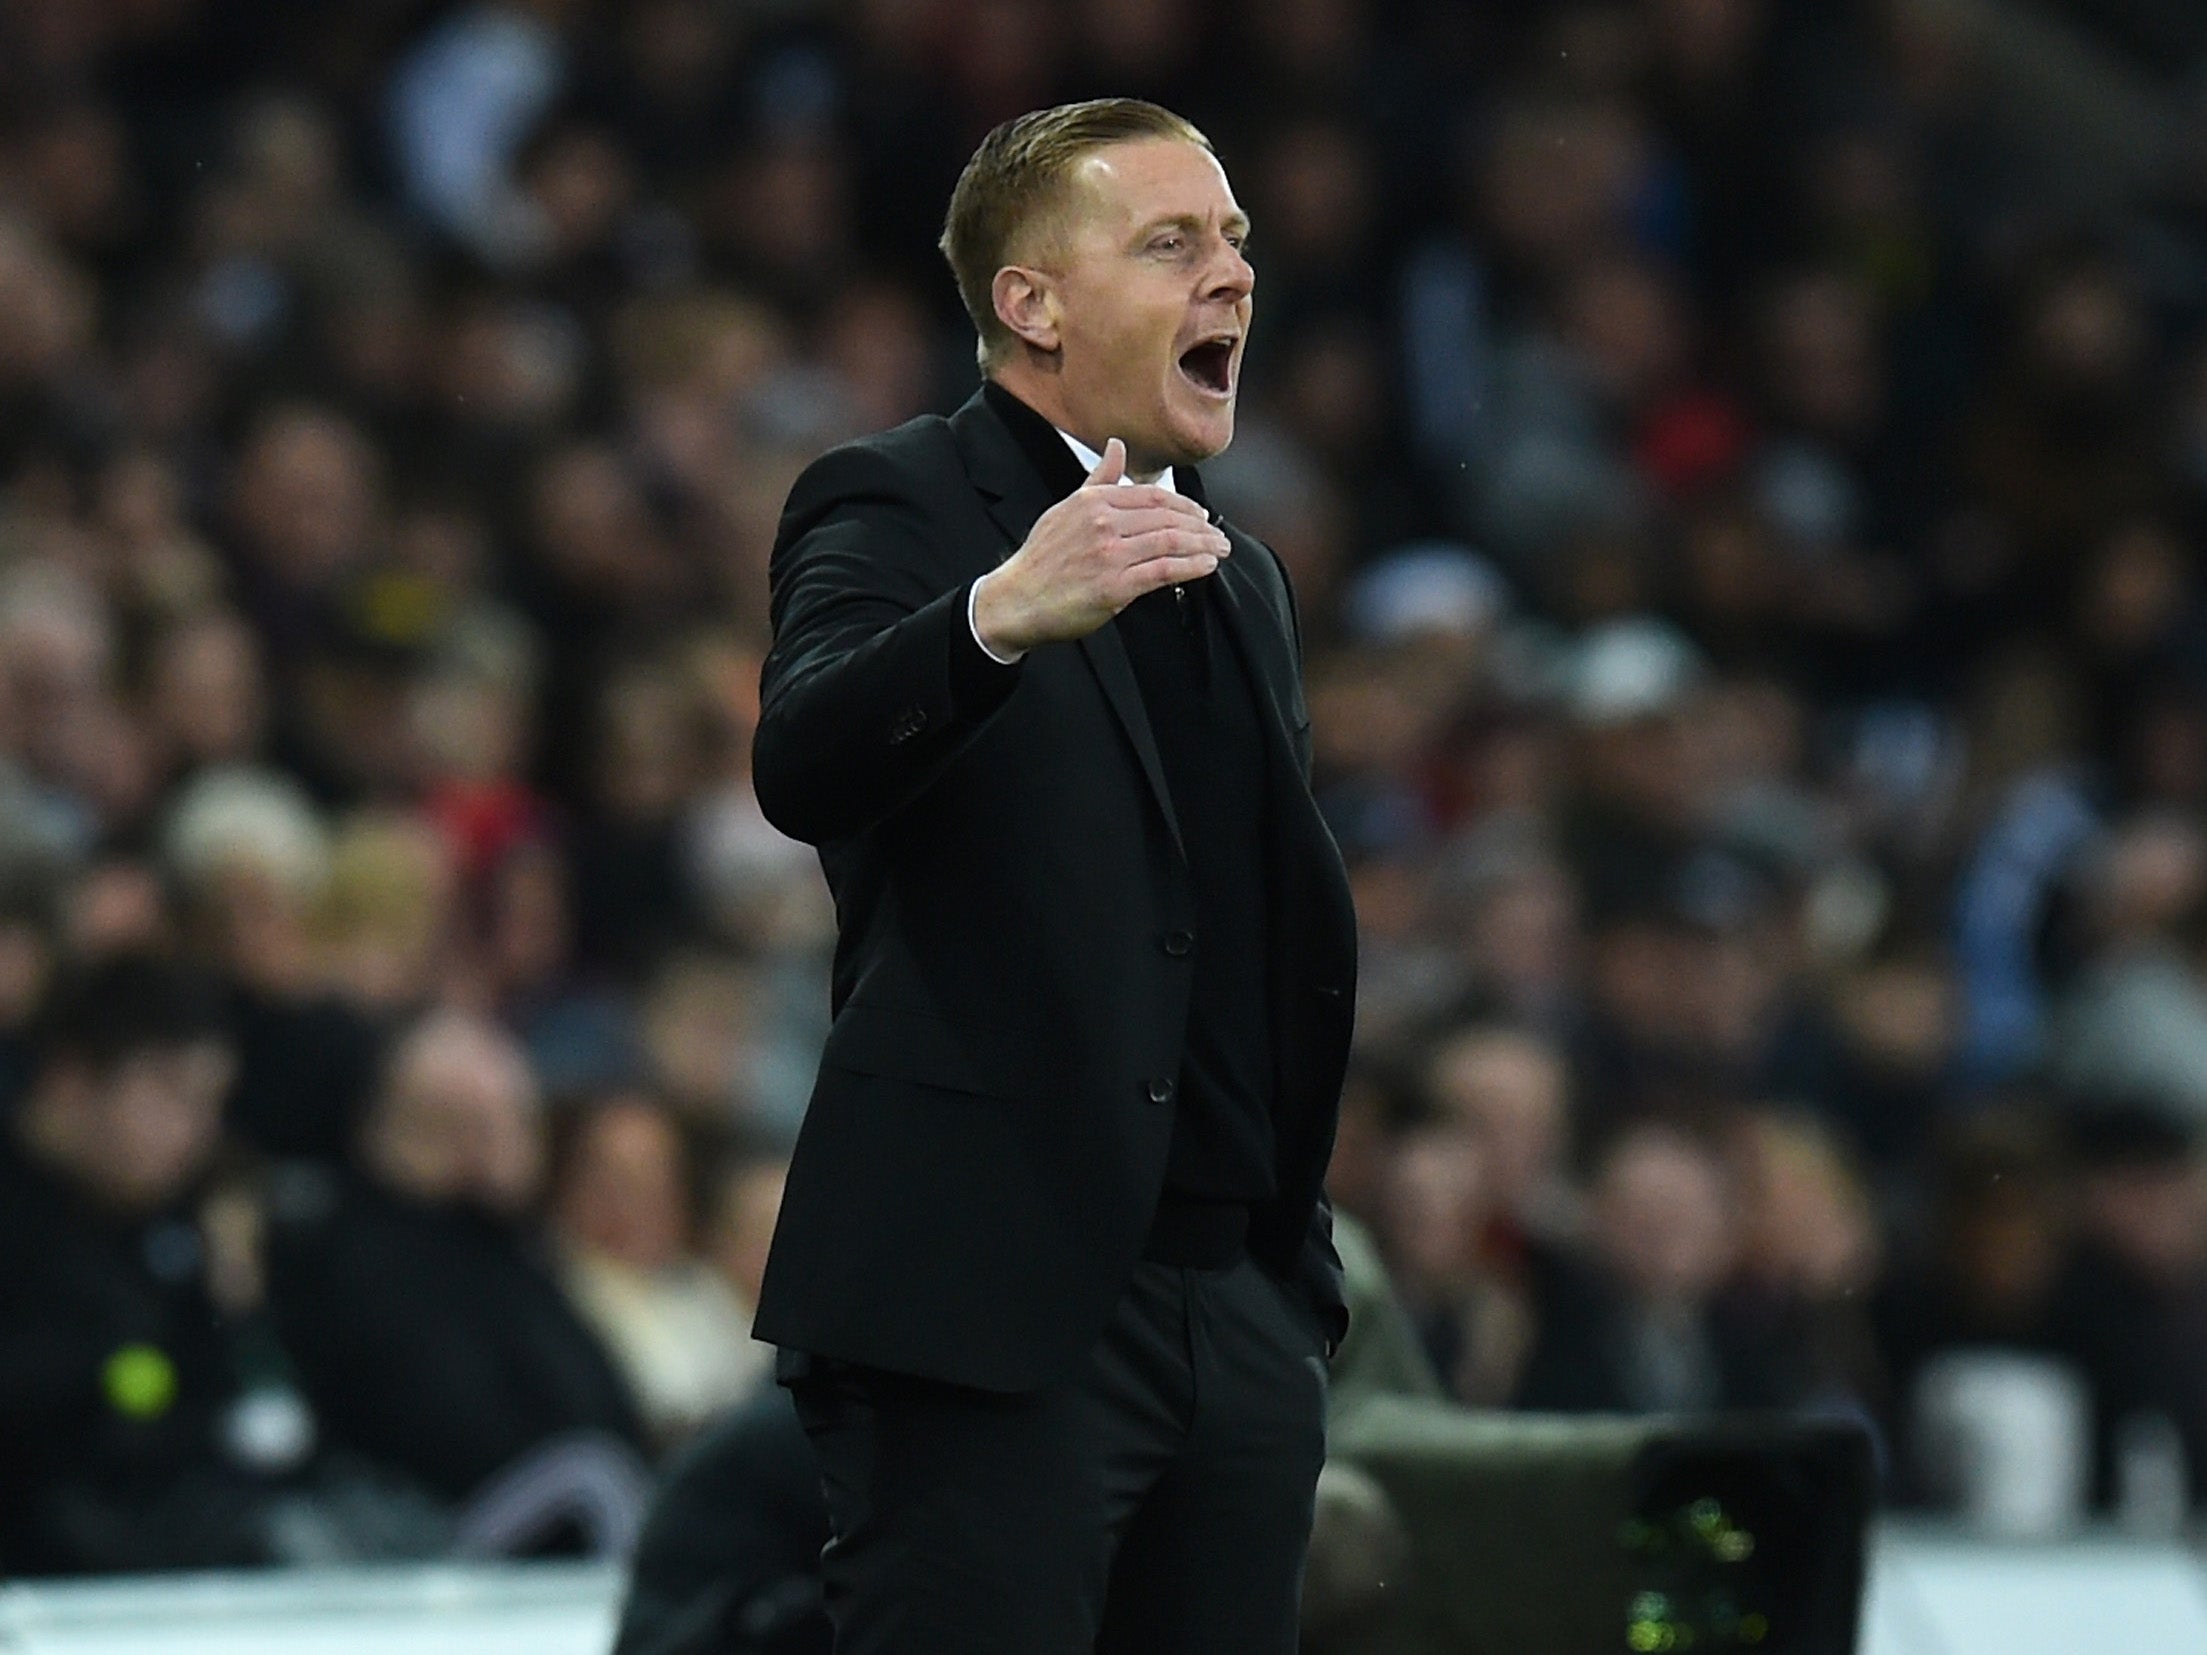 Garry Monk has been in charge since the summer and has helped give the club stability